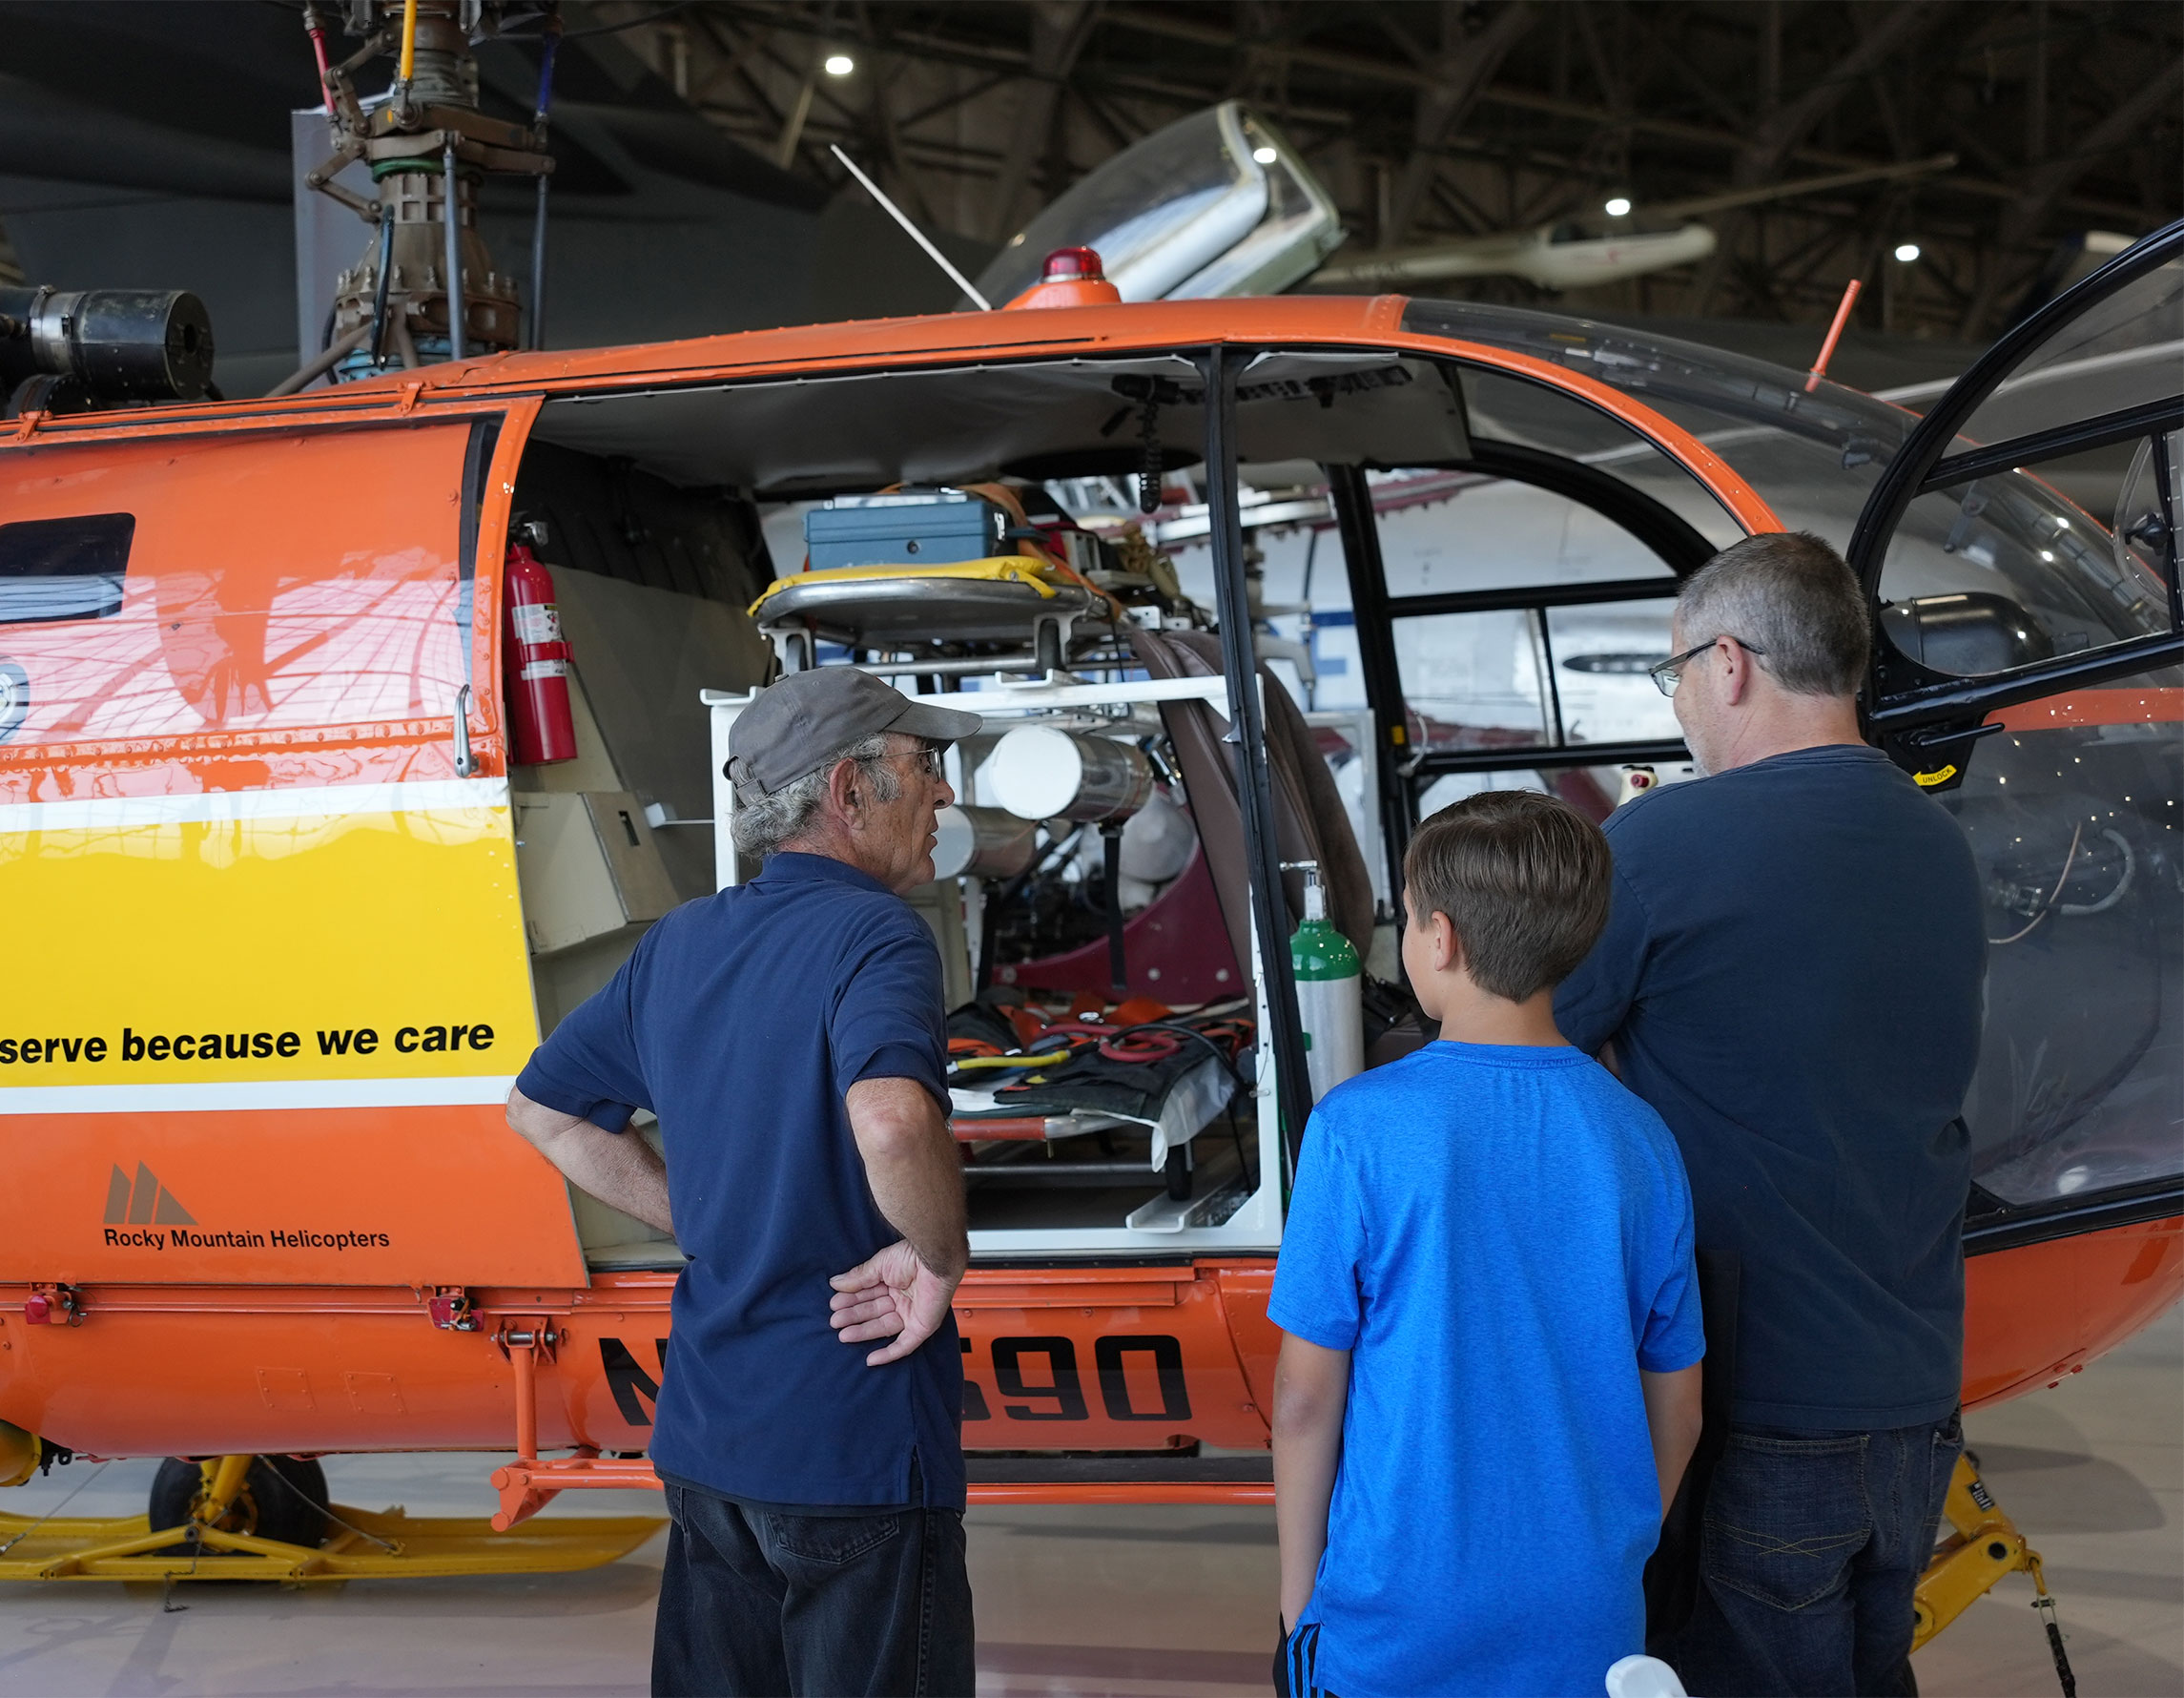 Guests standing with a volunteer looking into the Alouette Helicopter